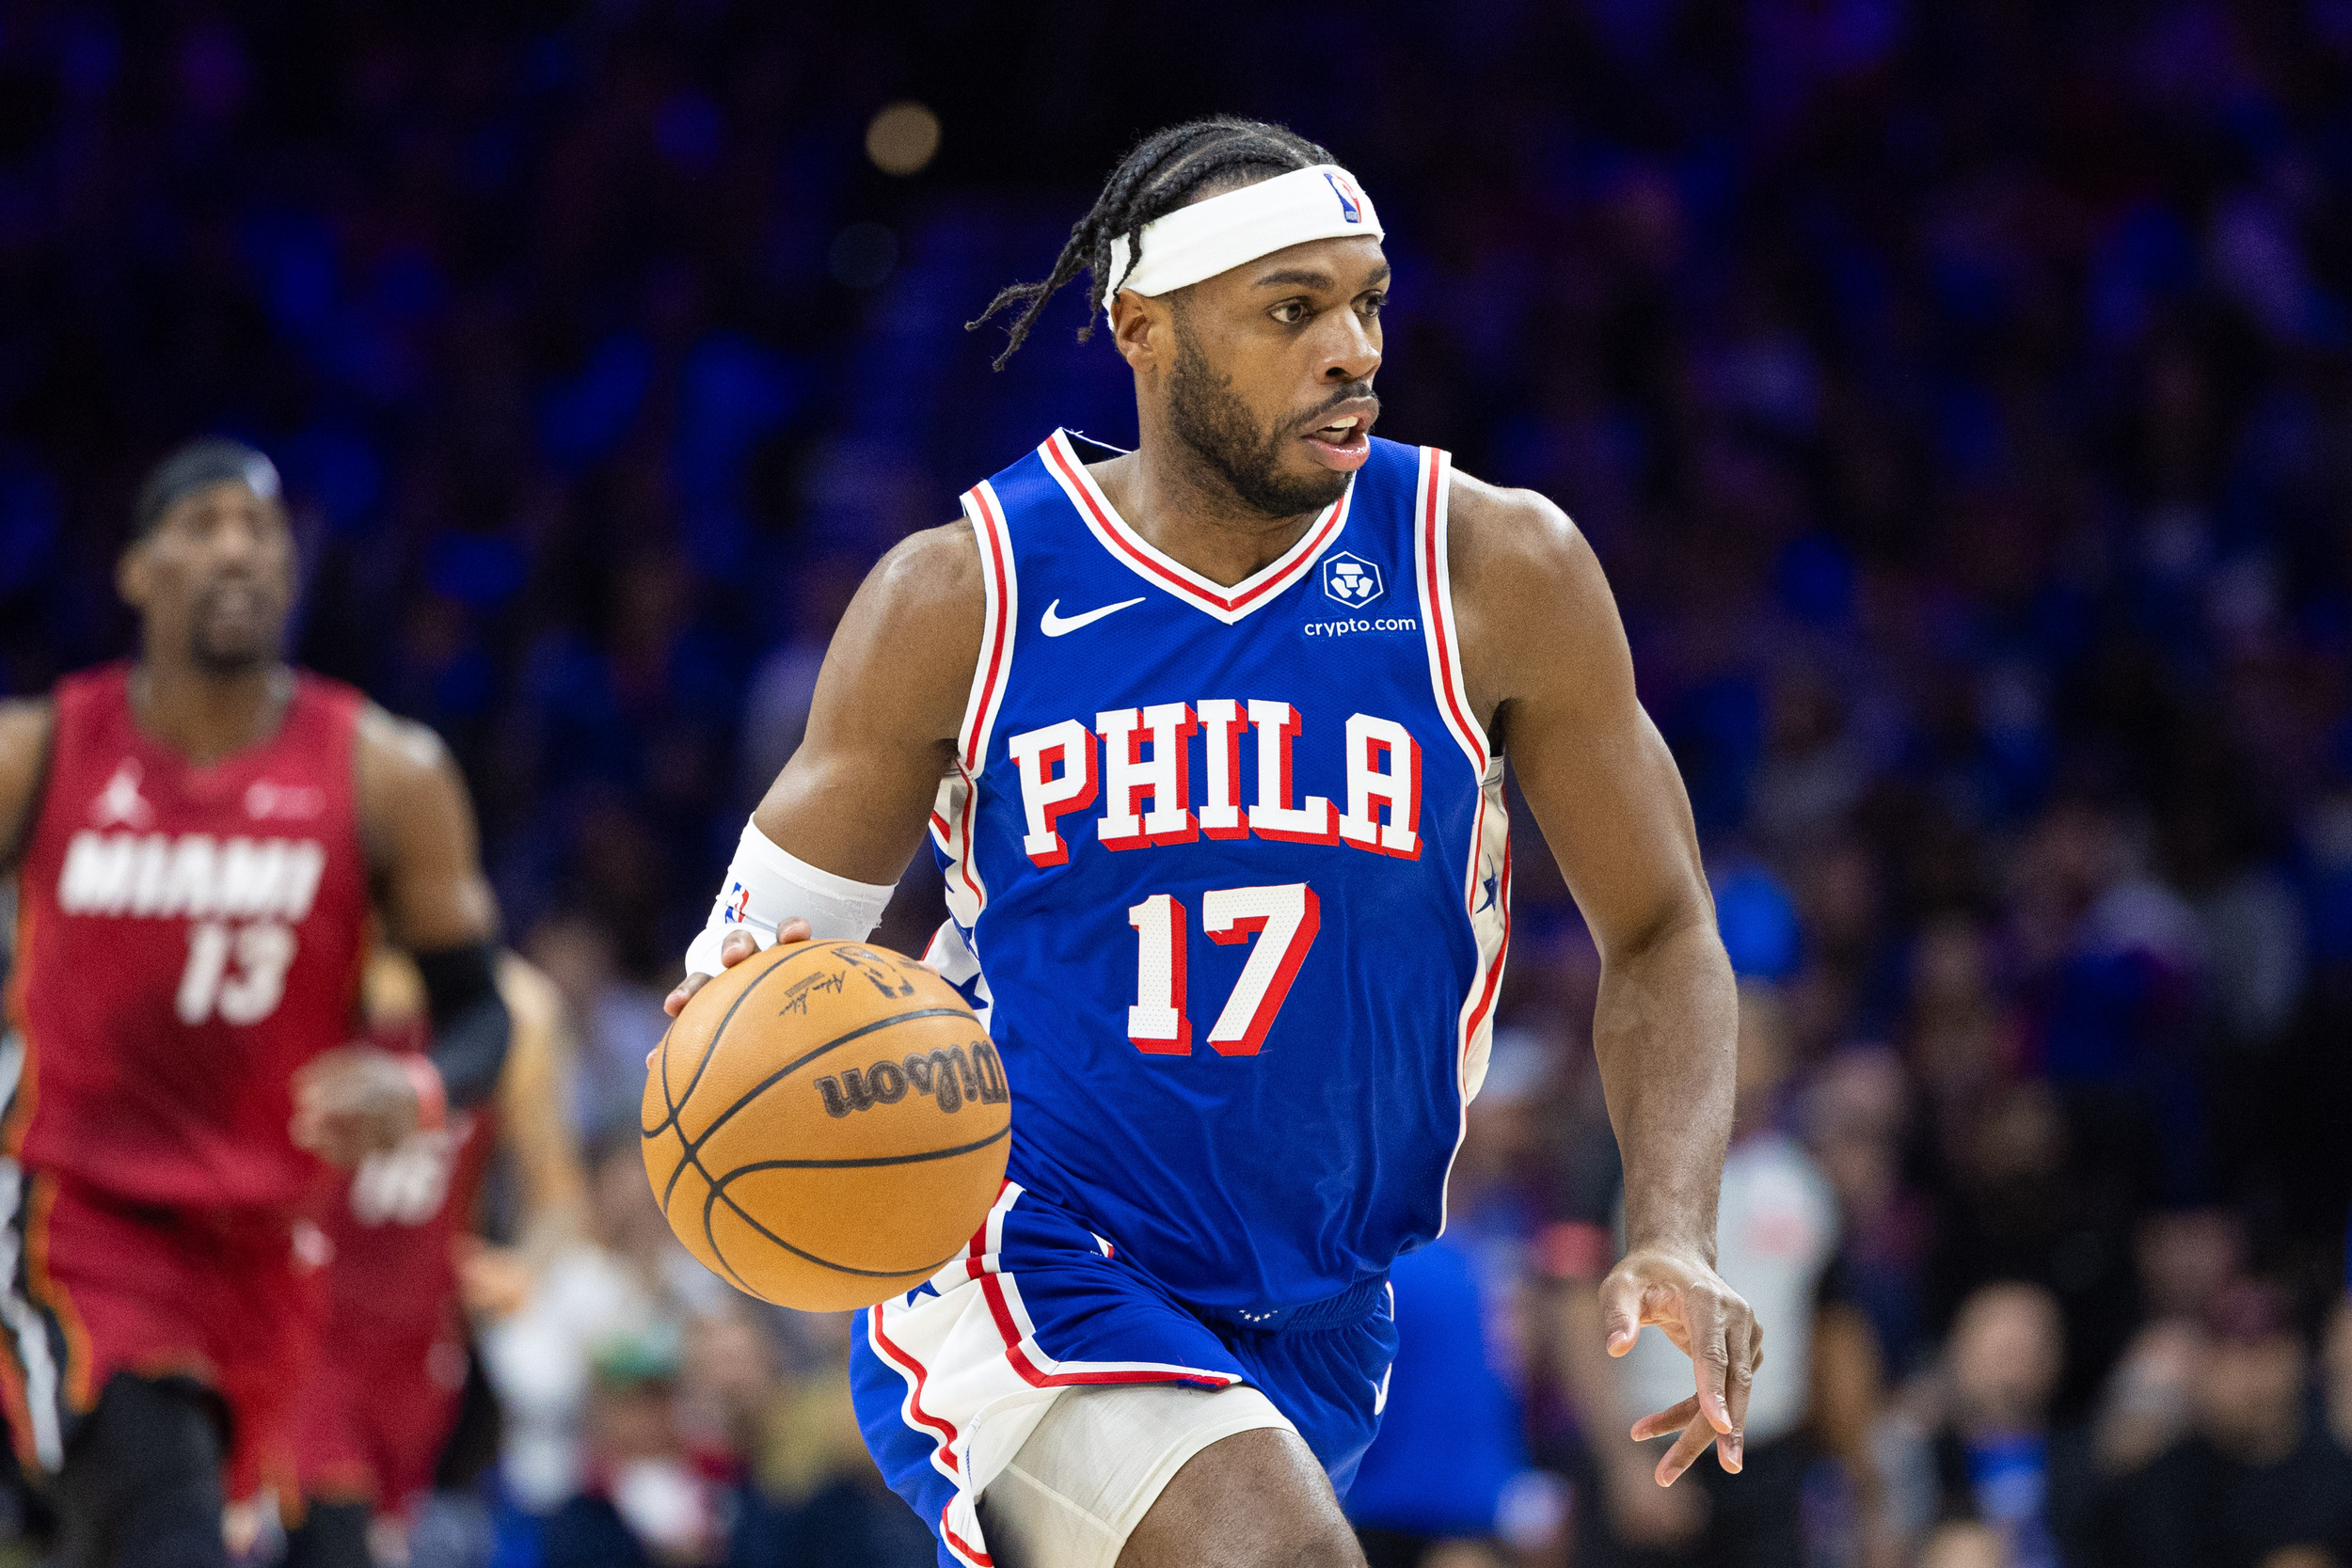 sixers guard finally makes playoffs after eight seasons